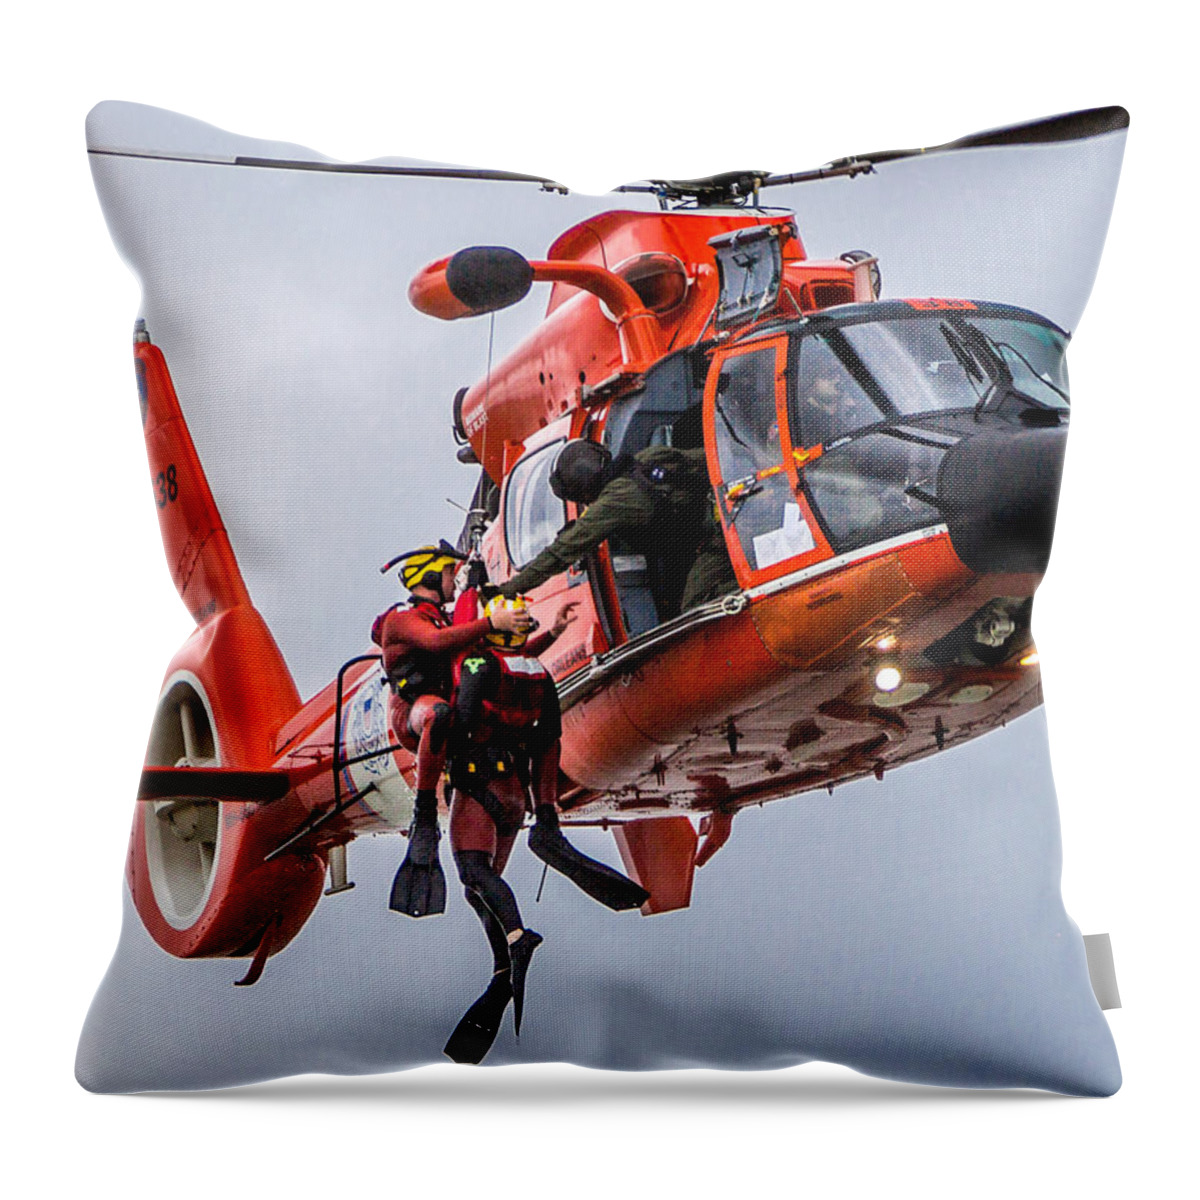 Helicopter Throw Pillow featuring the photograph Hoisting Into Helicopter by Gregory Daley MPSA